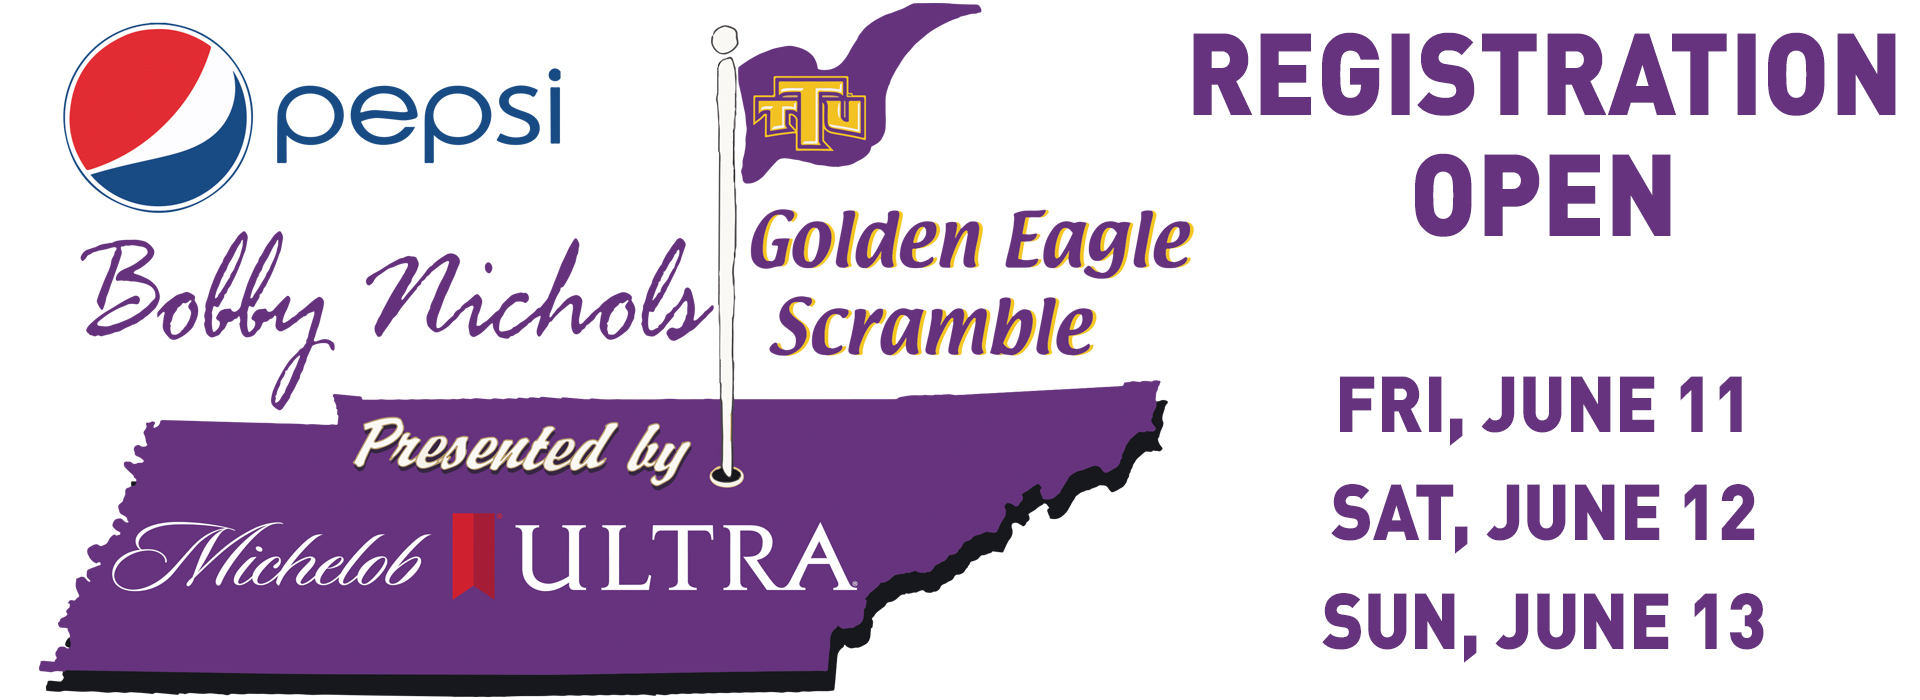 Registration for 2021 Pepsi Bobby Nichols Golden Eagle Scramble presented by Michelob Ultra now open